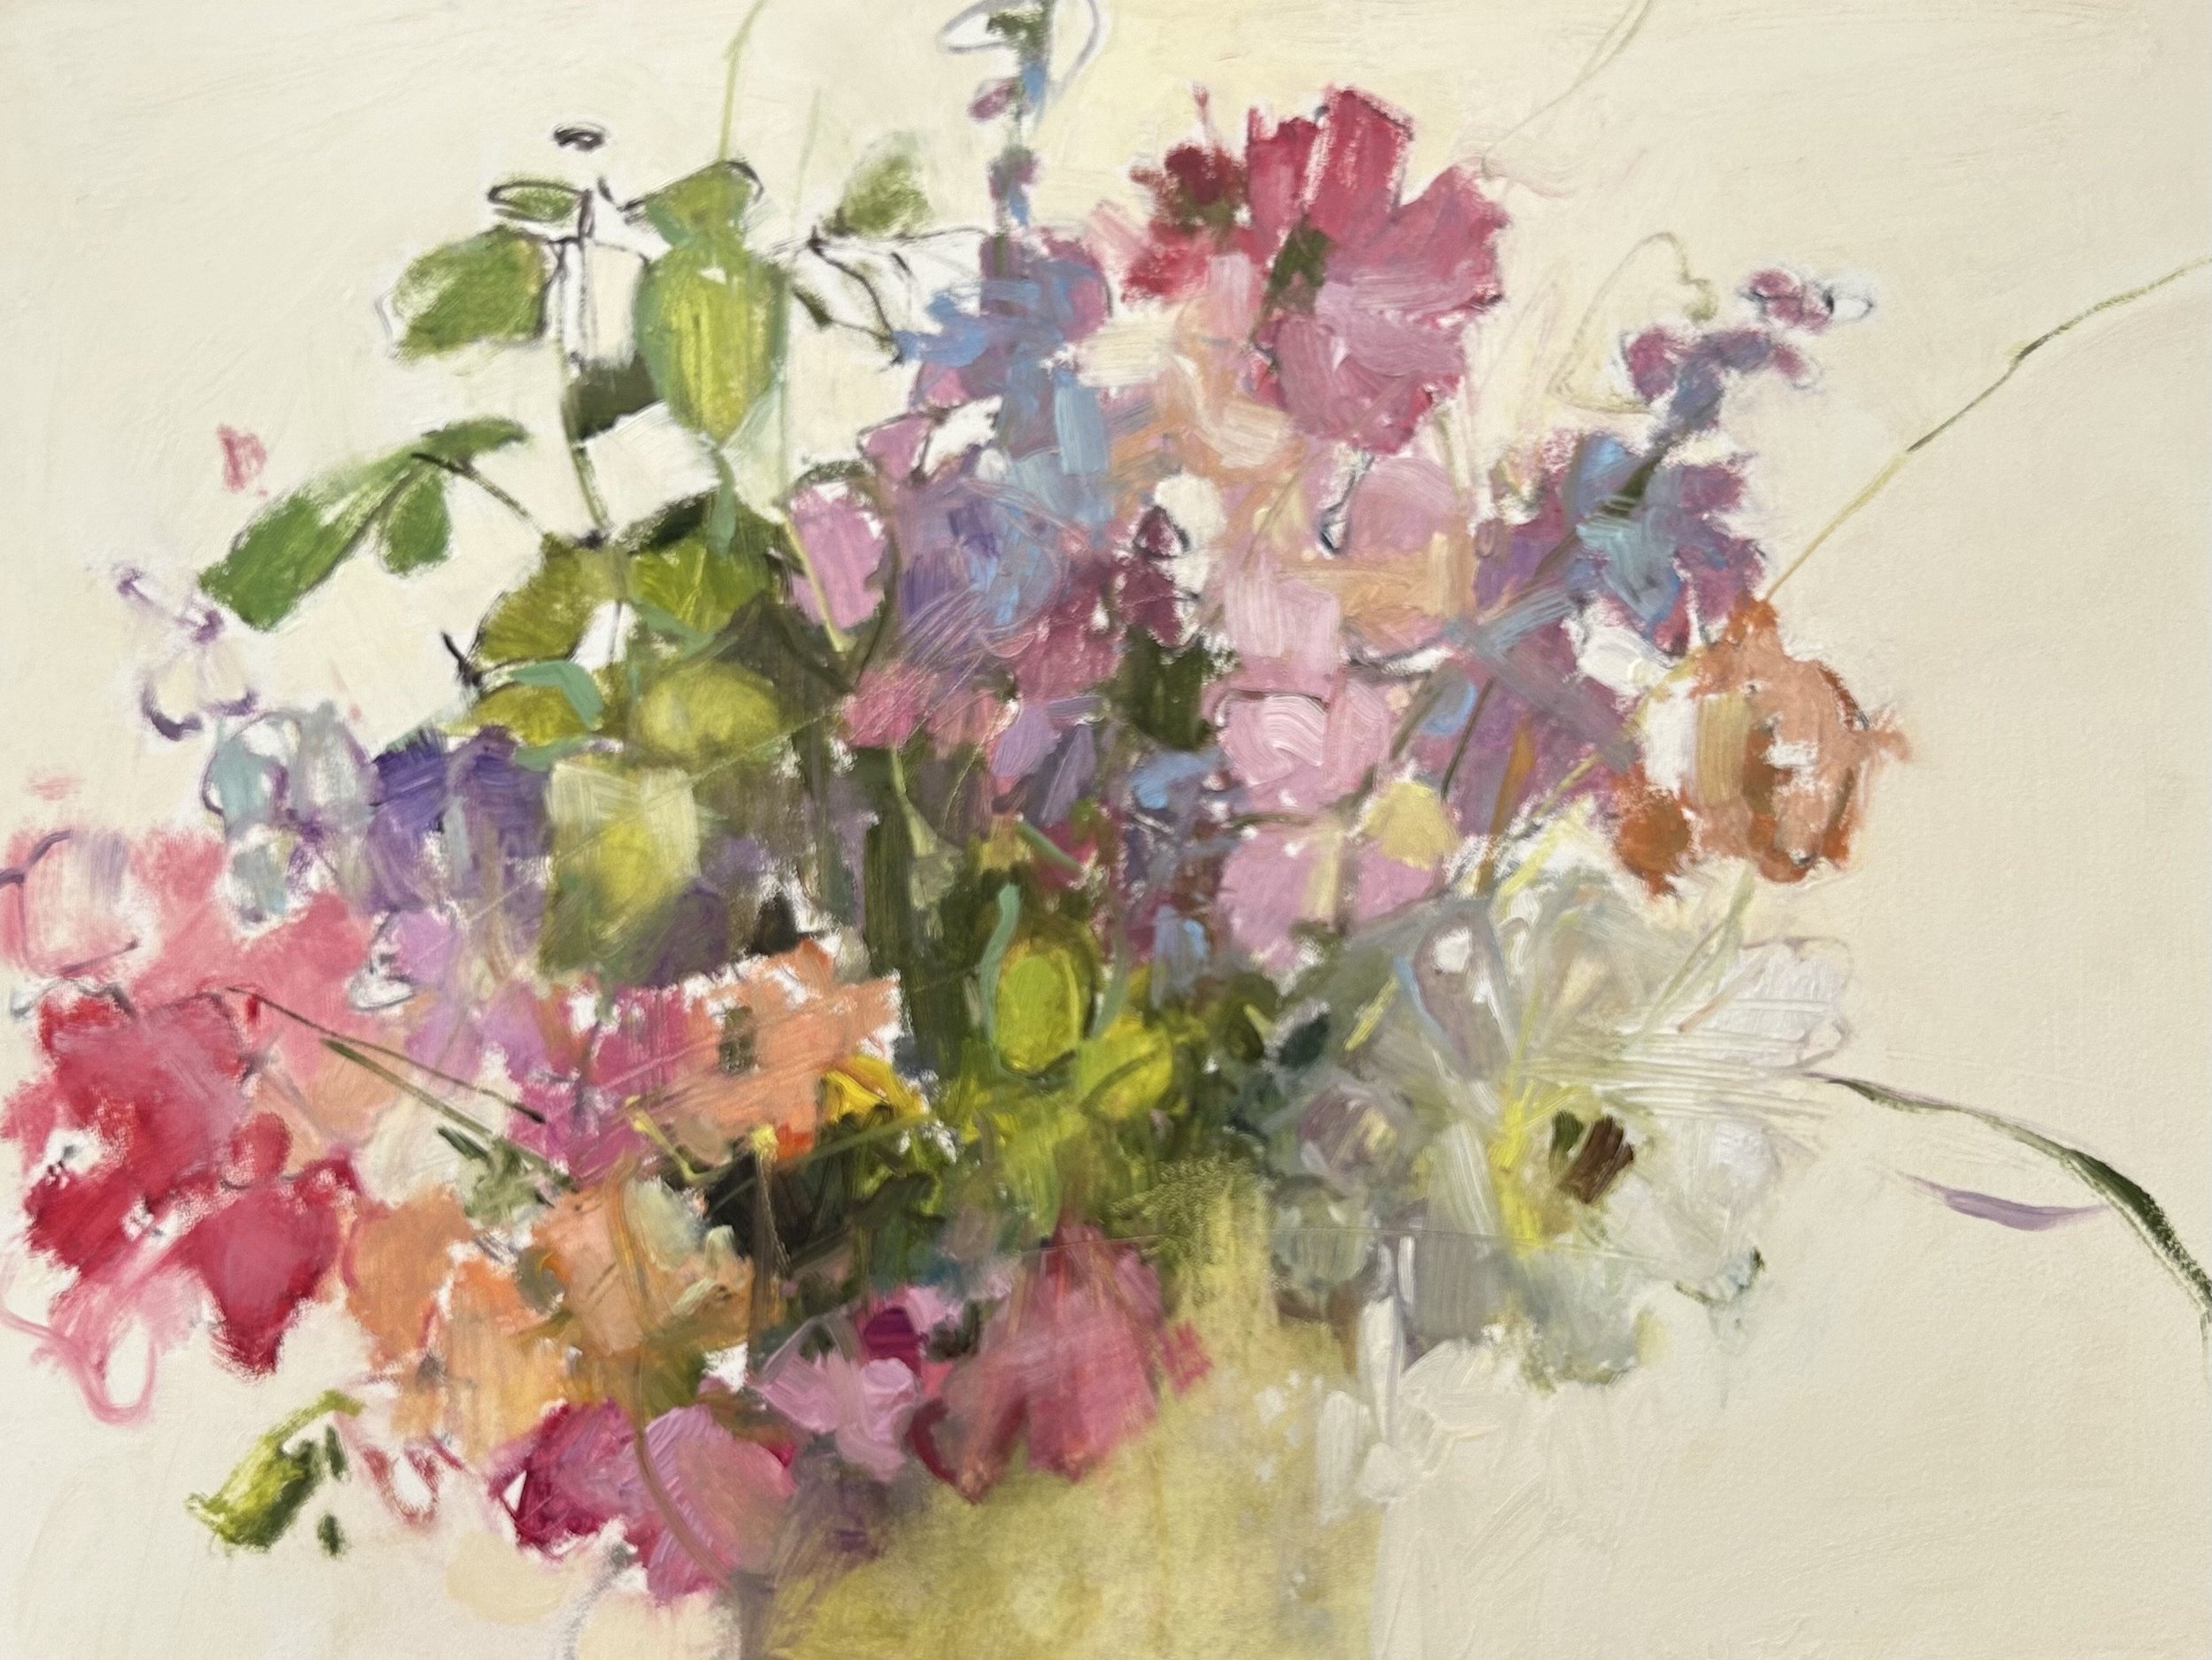 Shirley Claire Williams 'From the Flower Farm'